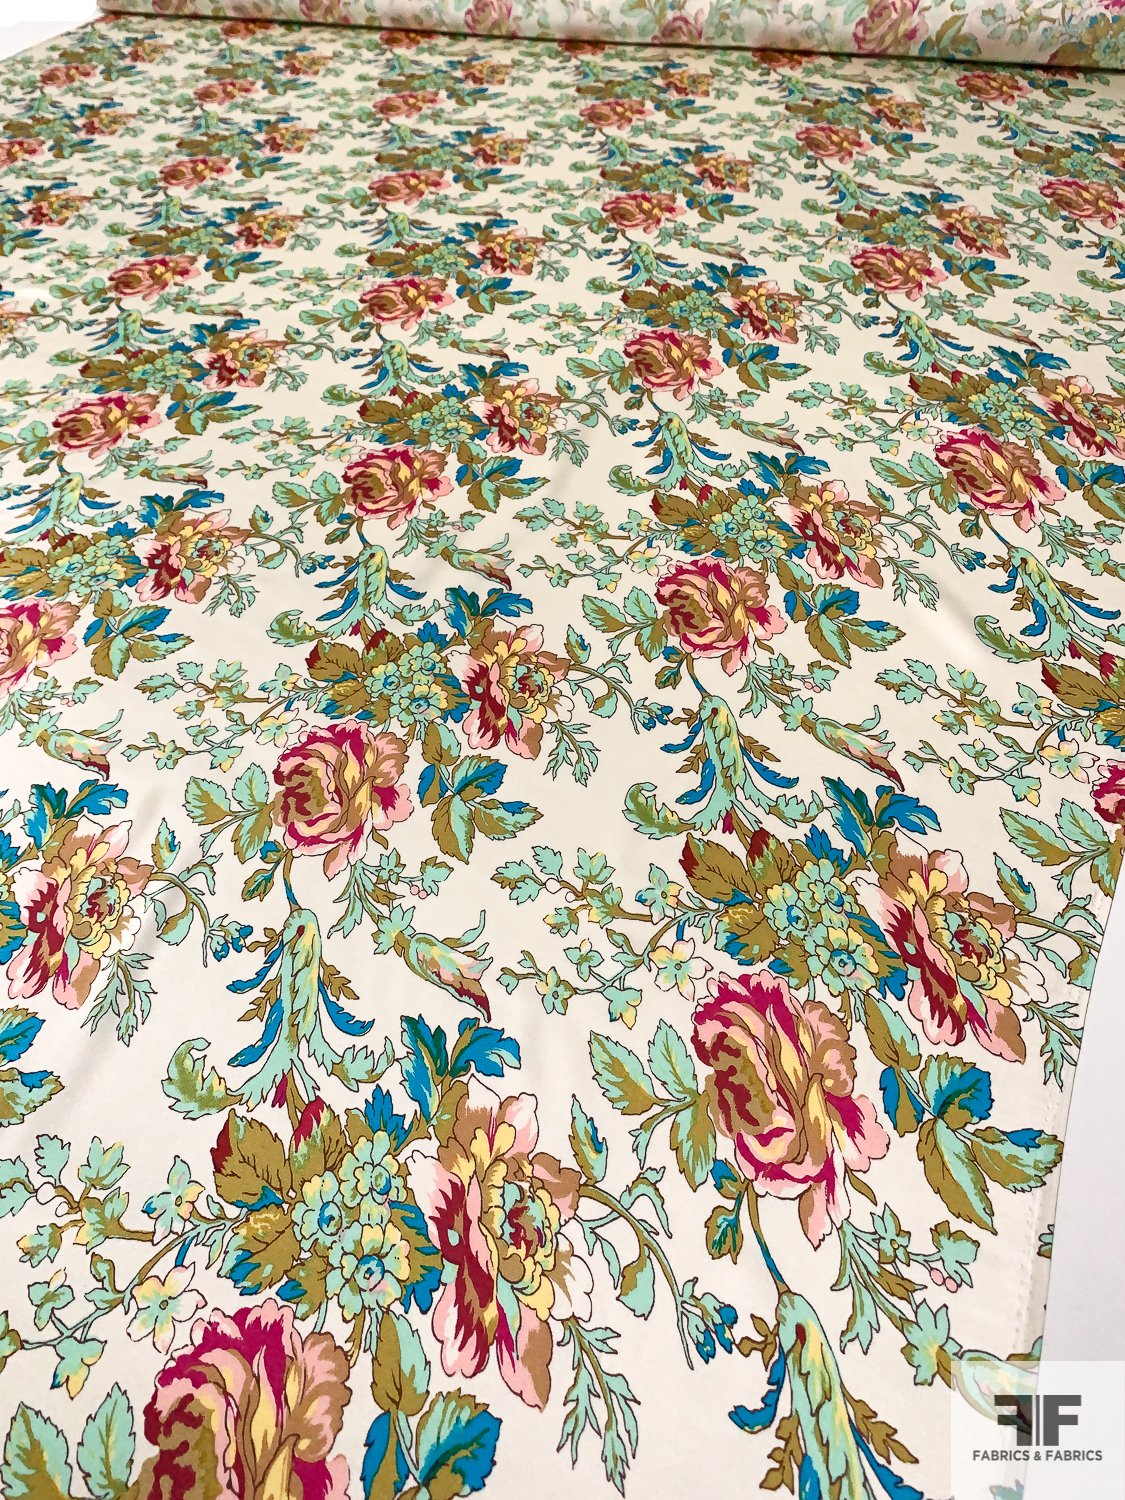 Springy Floral Printed Silk Charmeuse - Seafoam / Turquoise / Magenta / Pink